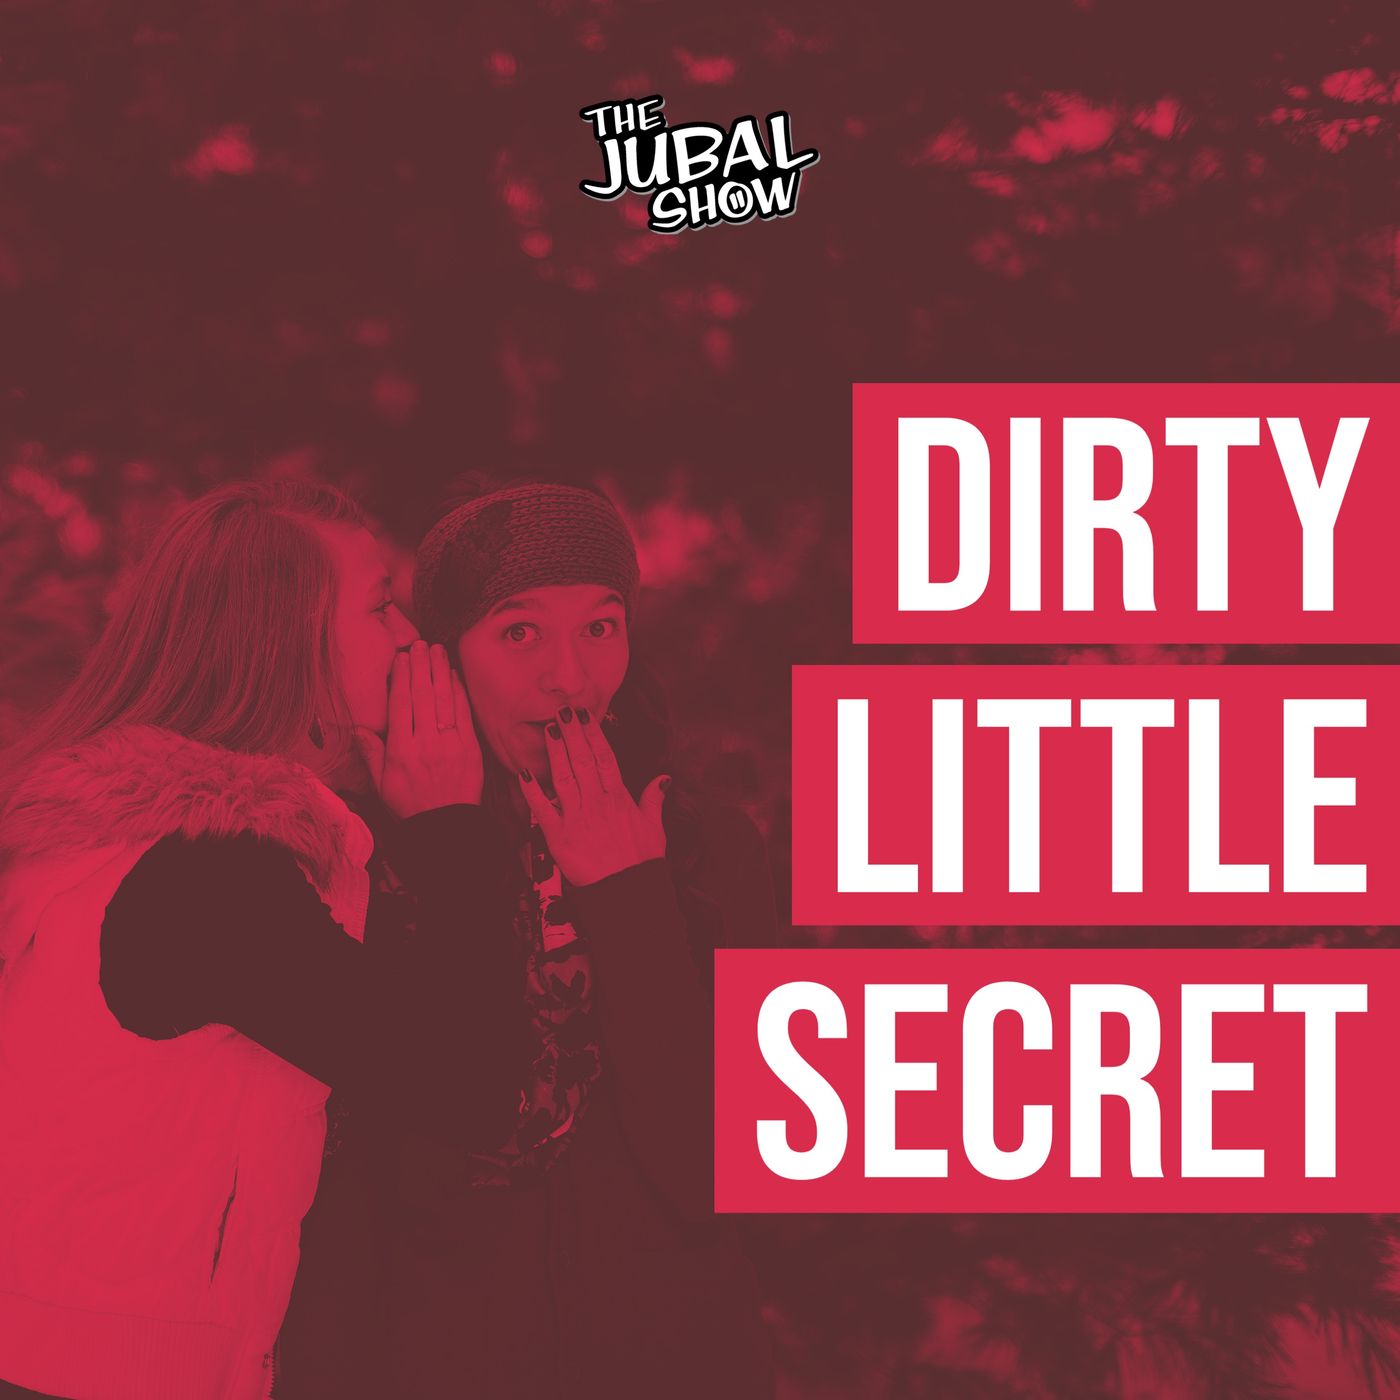 What Dirty Little Secret is this caller keeping from his fiancé?